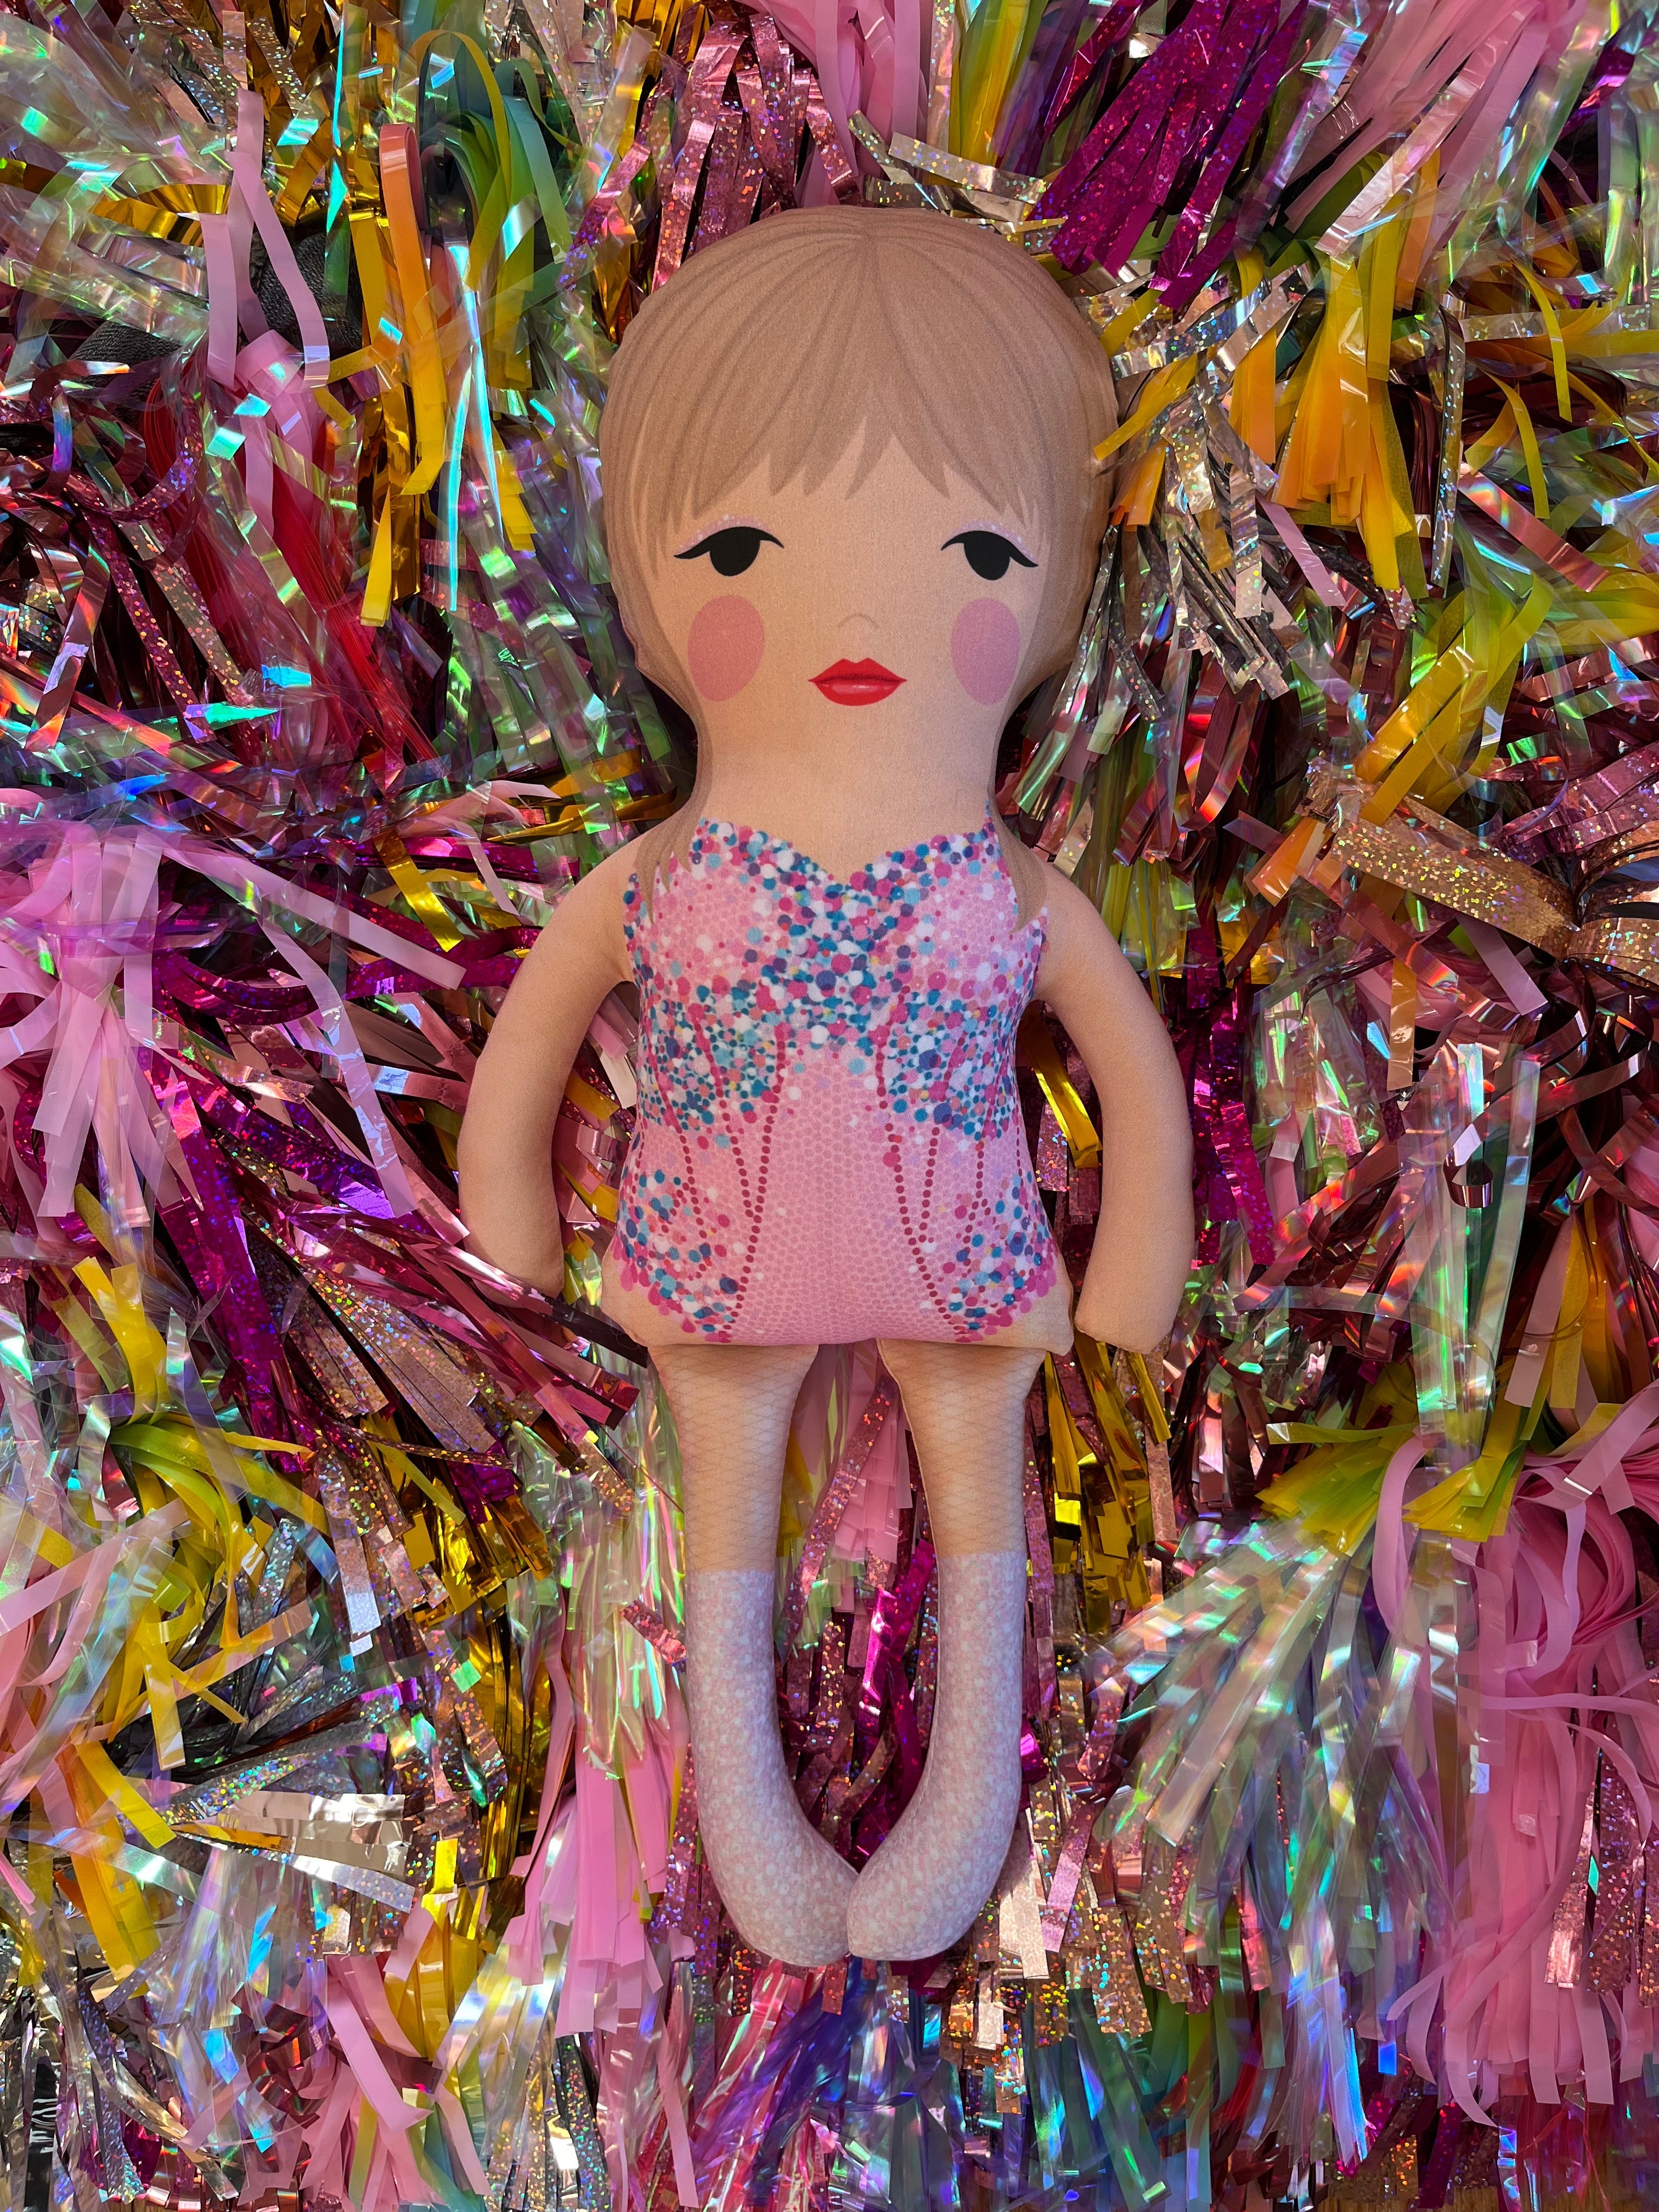 the unstuffed lover doll in pink and blue